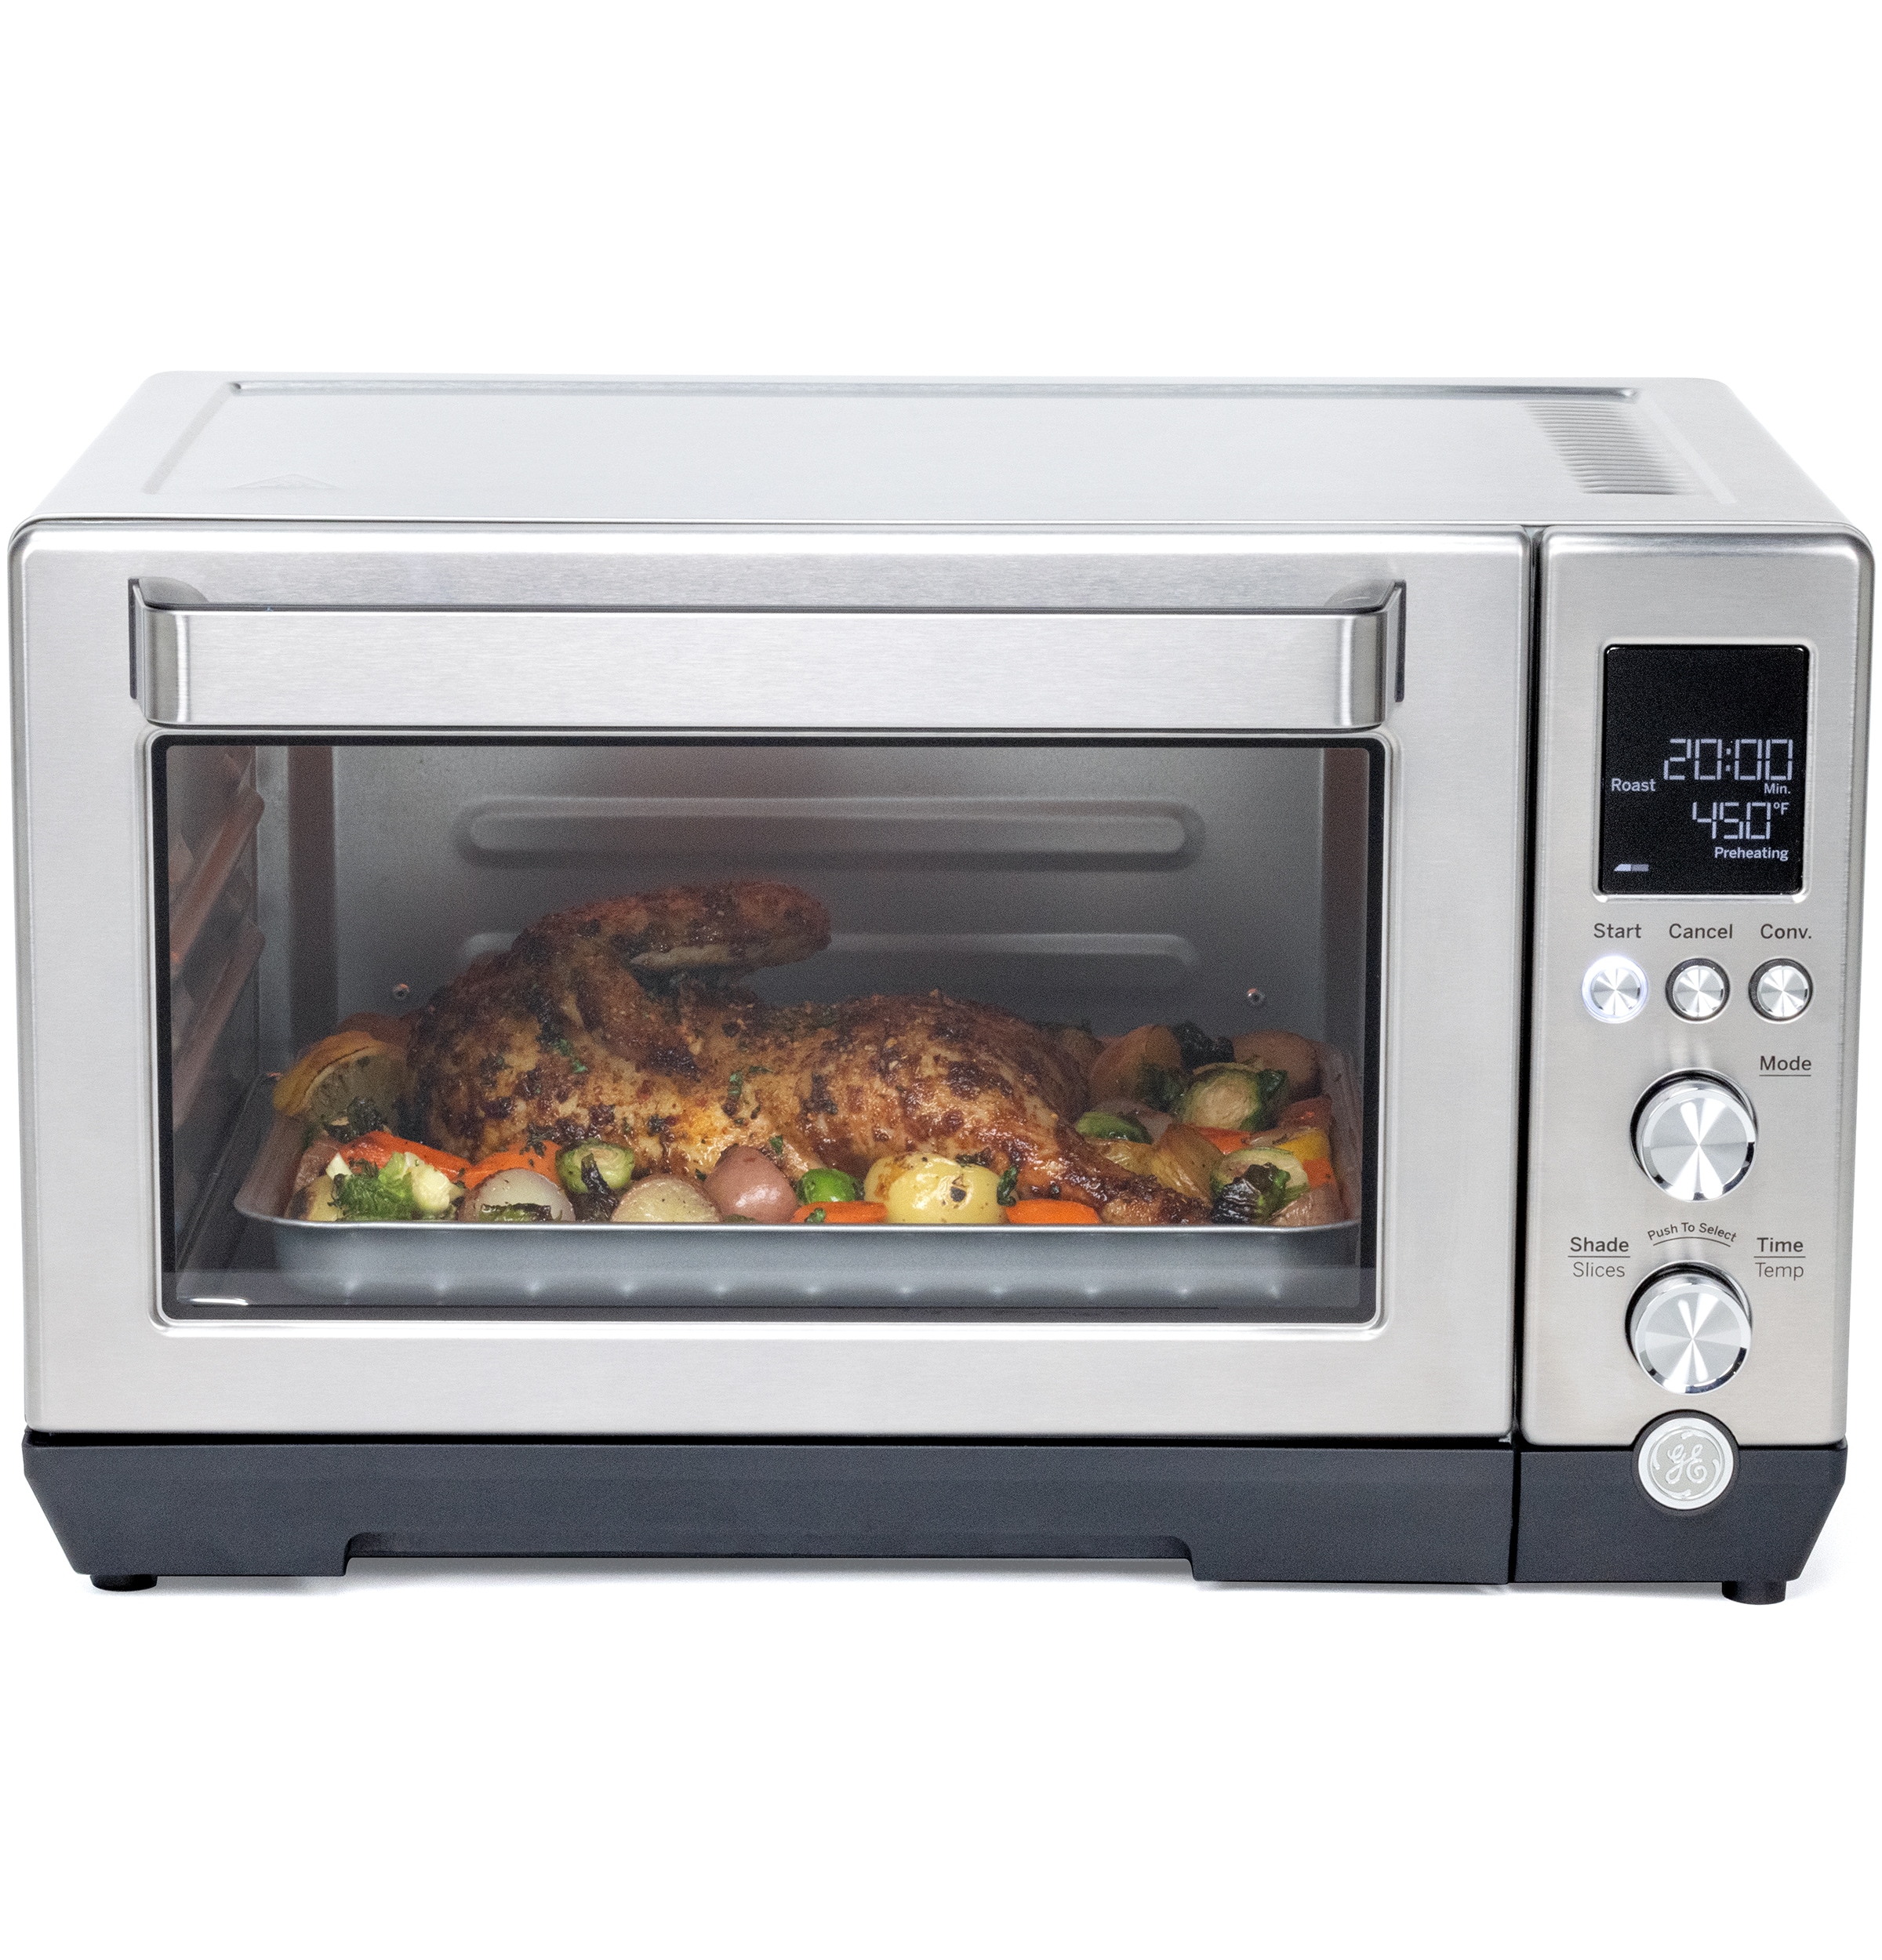 15L Capacity YHLZ Toaster Oven Small Household Countertop Oven Automatic Electric Toaster Oven with 60 Minutes Timing and 100-230°C Temperature Control for Baking A Variety of Foods 